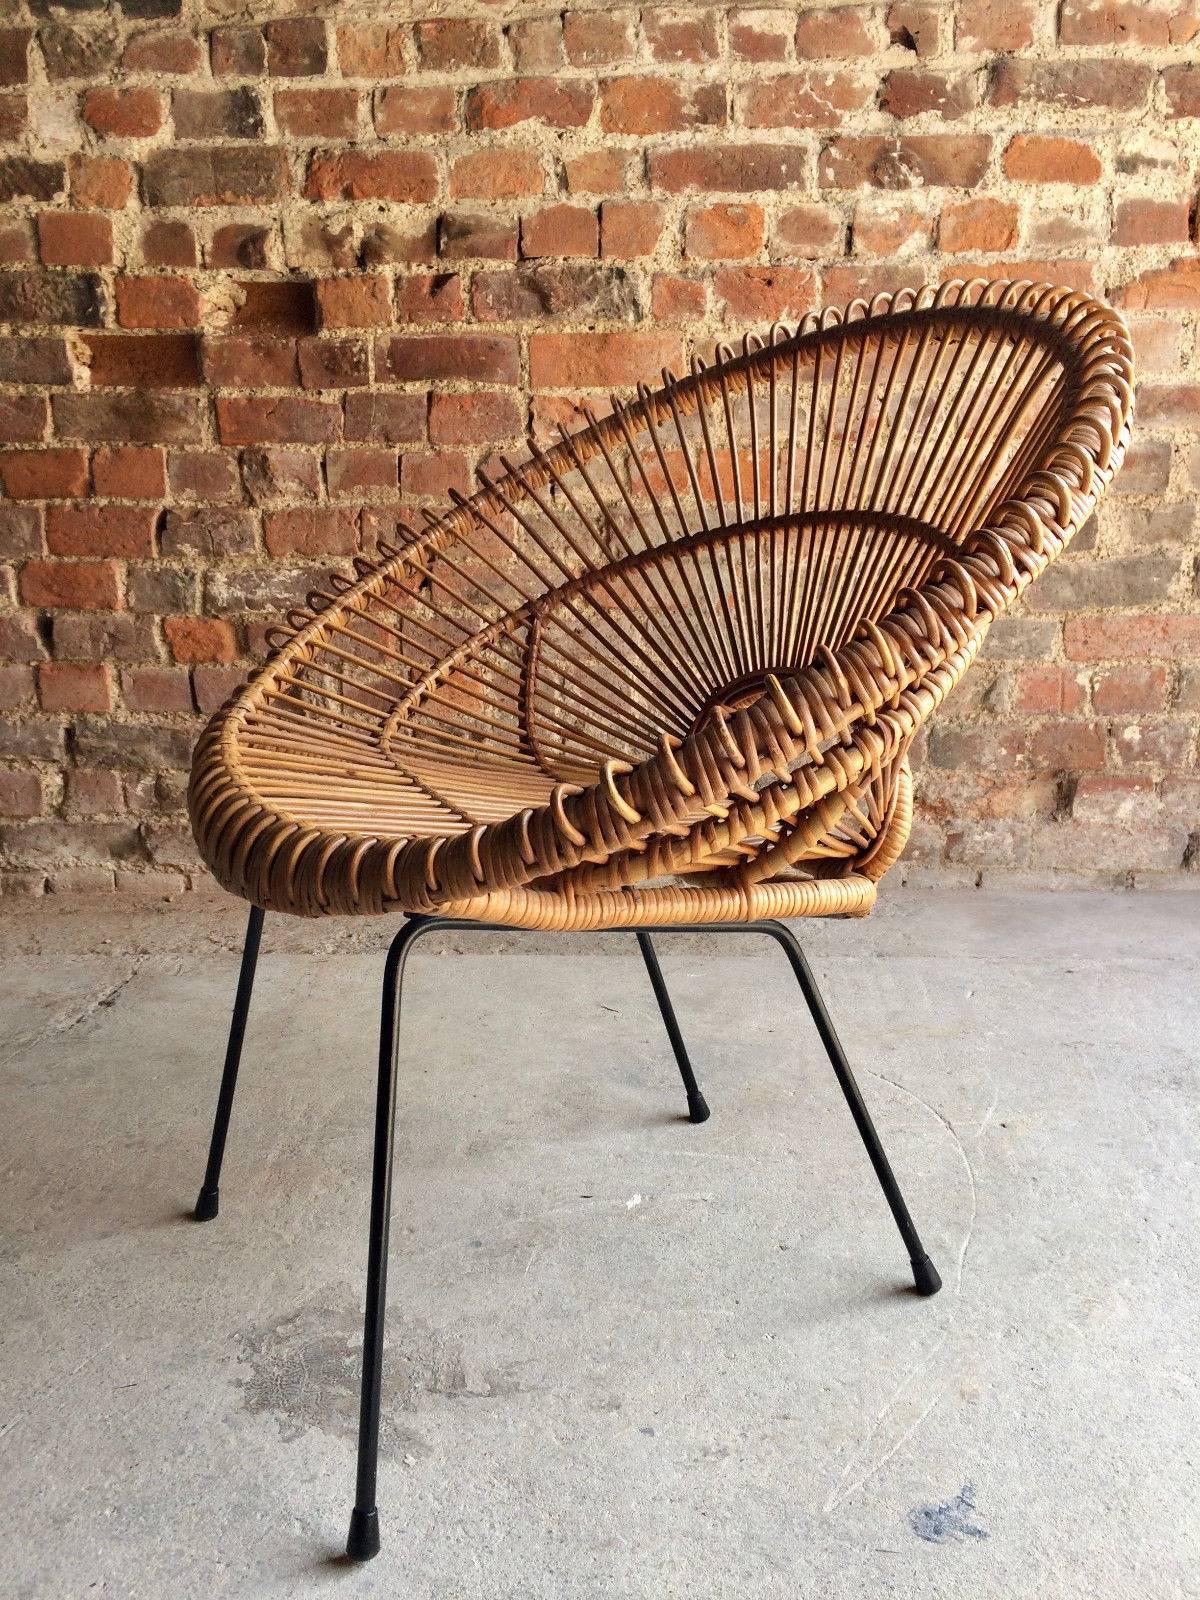 Stunningly beautiful Mid-Century 'Sunburst' rattan chair attributed to Franco Albini or sometimes Janine Abraham circa 1950s, fabulous deep bucket seat with open loop back, raised on black iron base, offered in excellent completely original